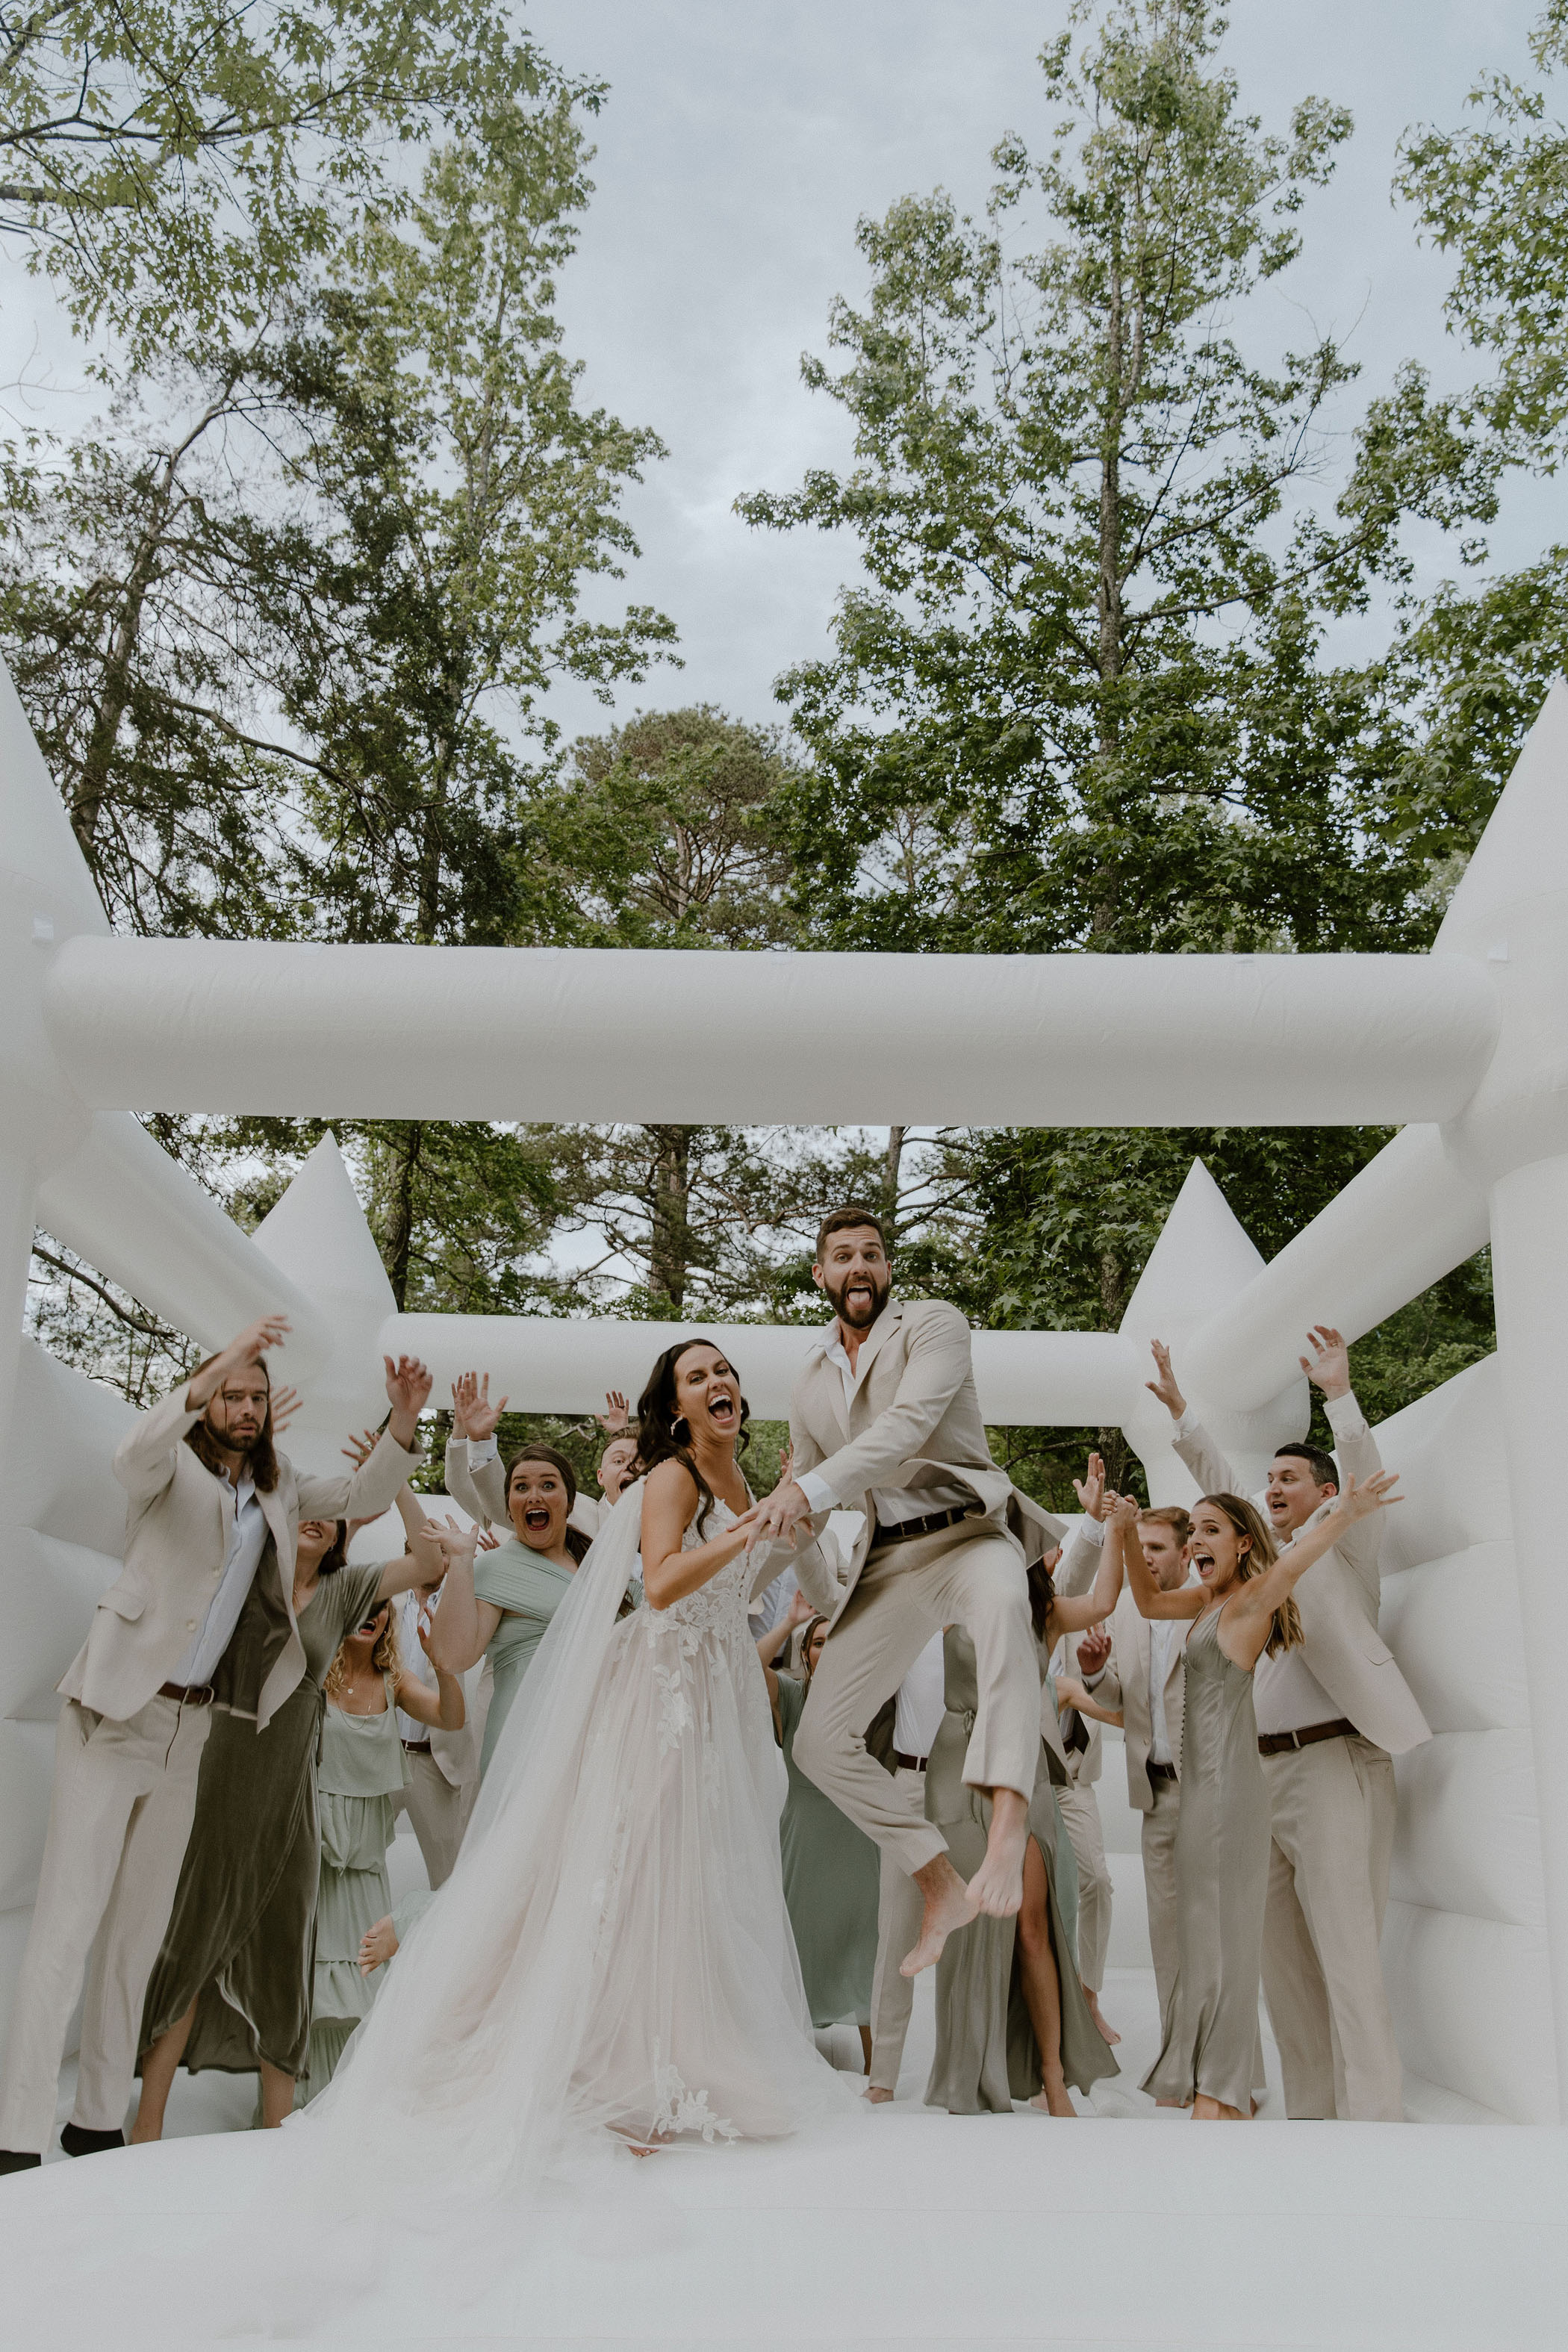 Bounce House Wedding in the Forest